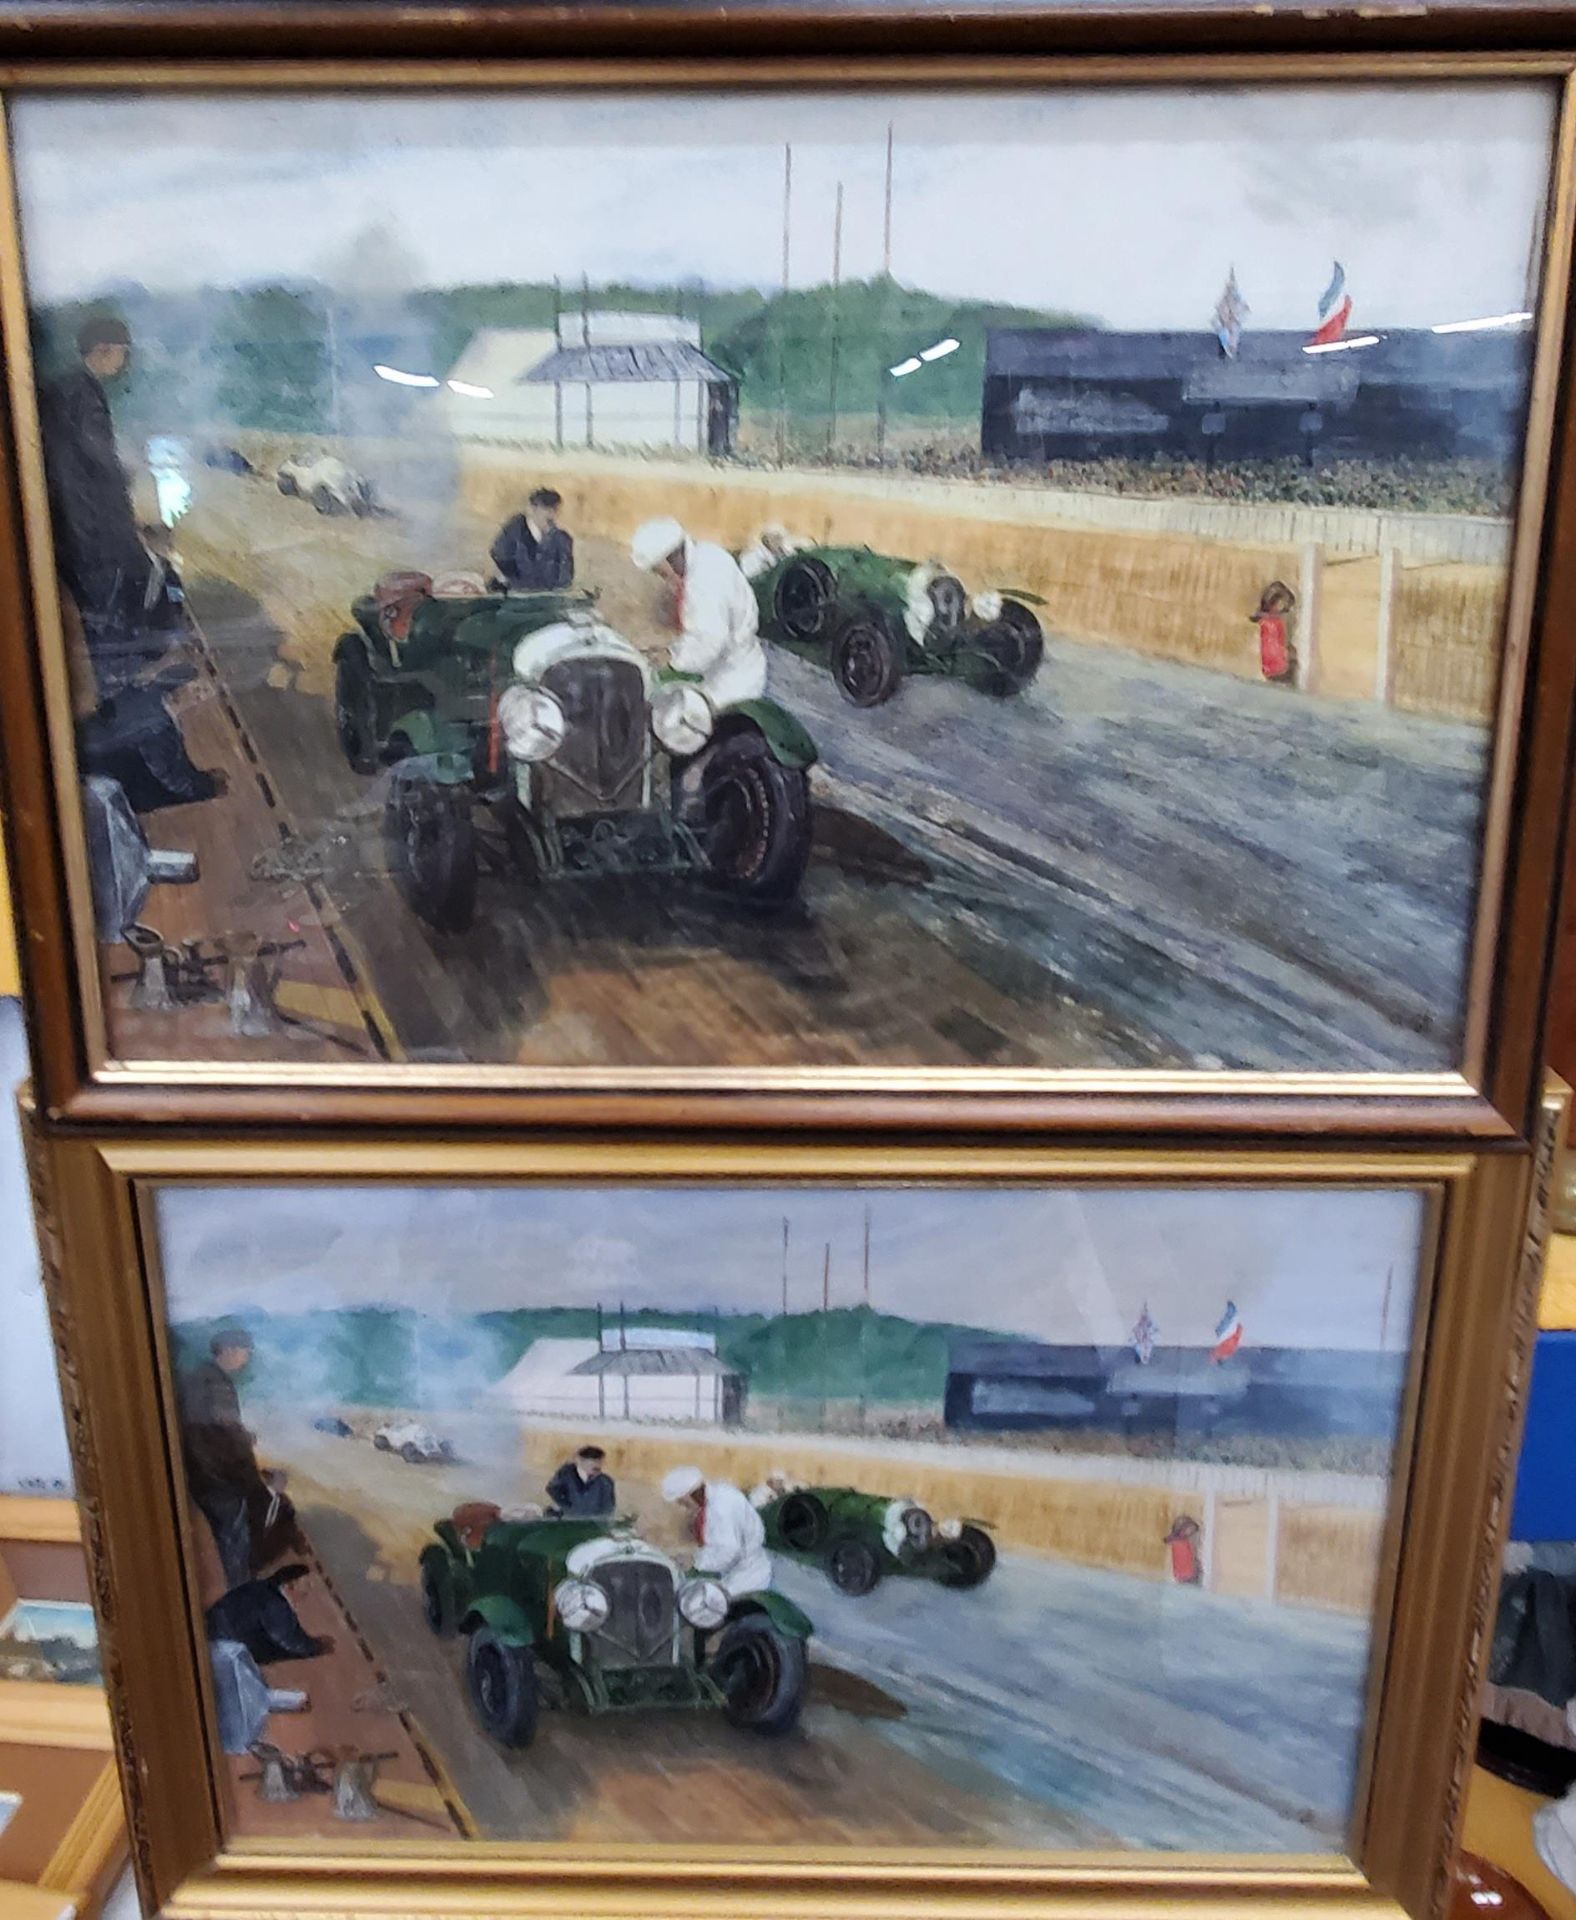 A WATERCOLOUR AND A PRINT OF VINTAGE RACING CARS ON A TRACK, SIGNED AND FRAMED